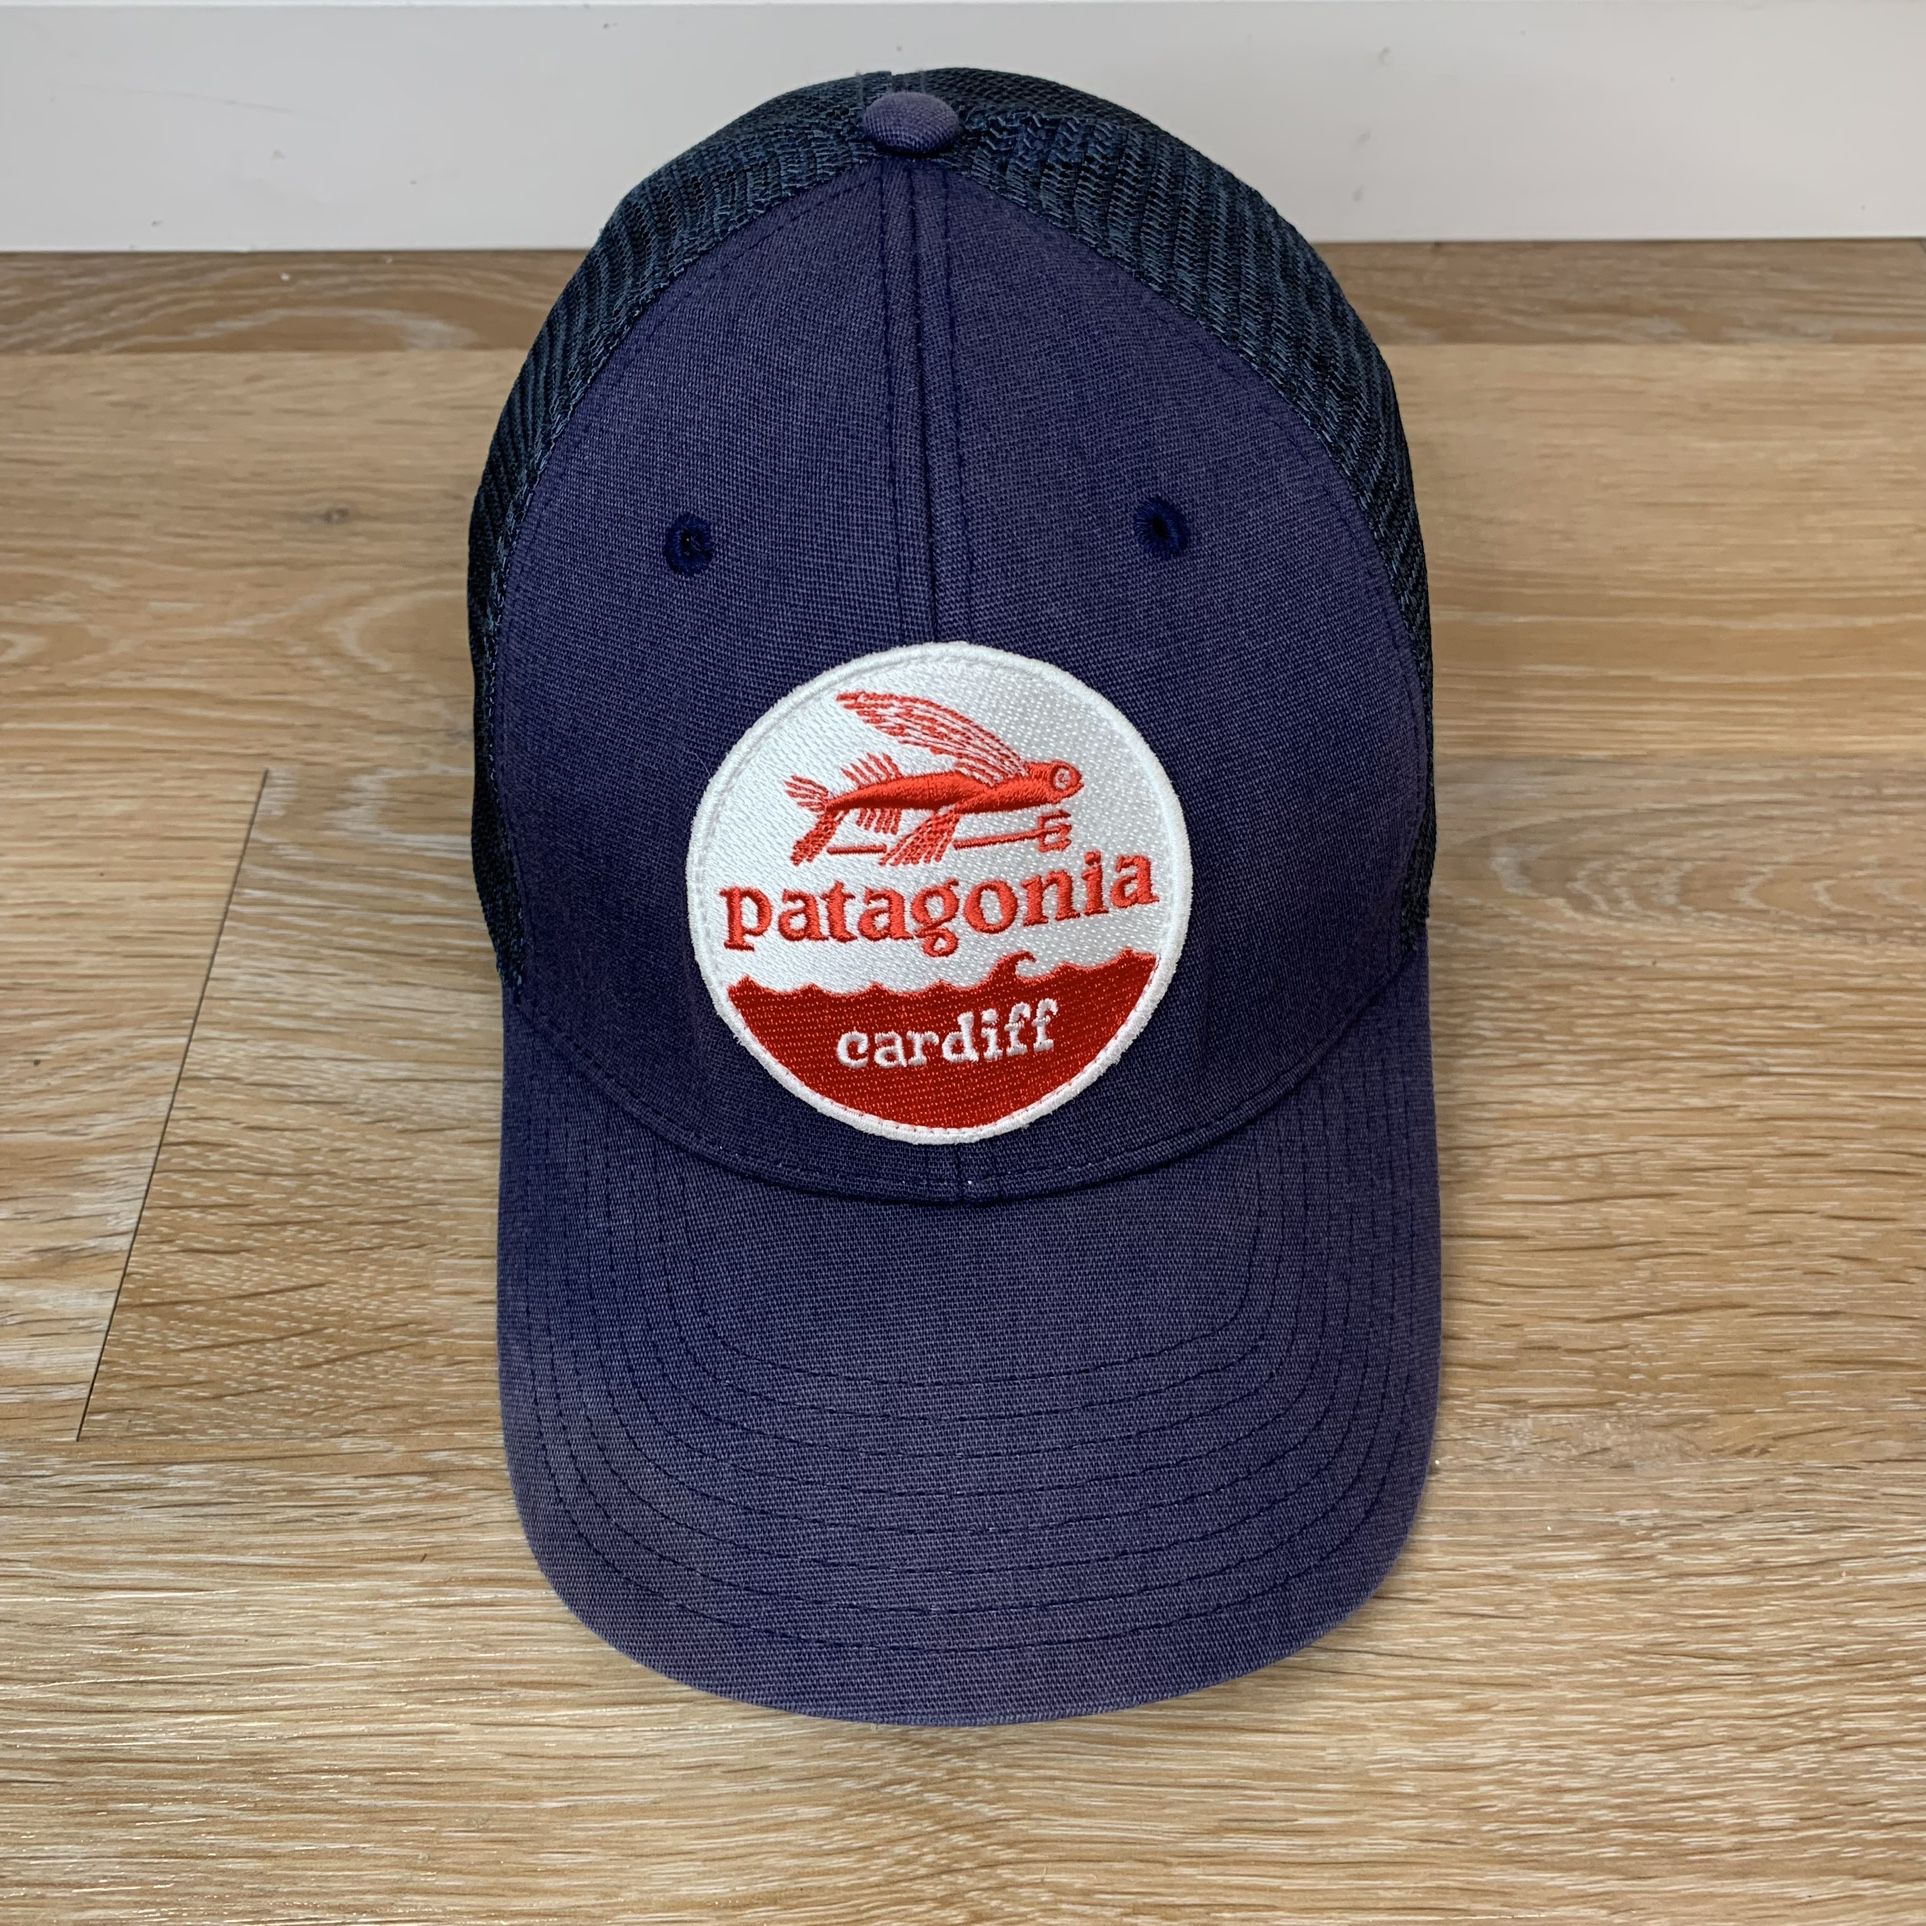 Patagonia Cardiff Limited Edition Patch Snapback Fishing Hat